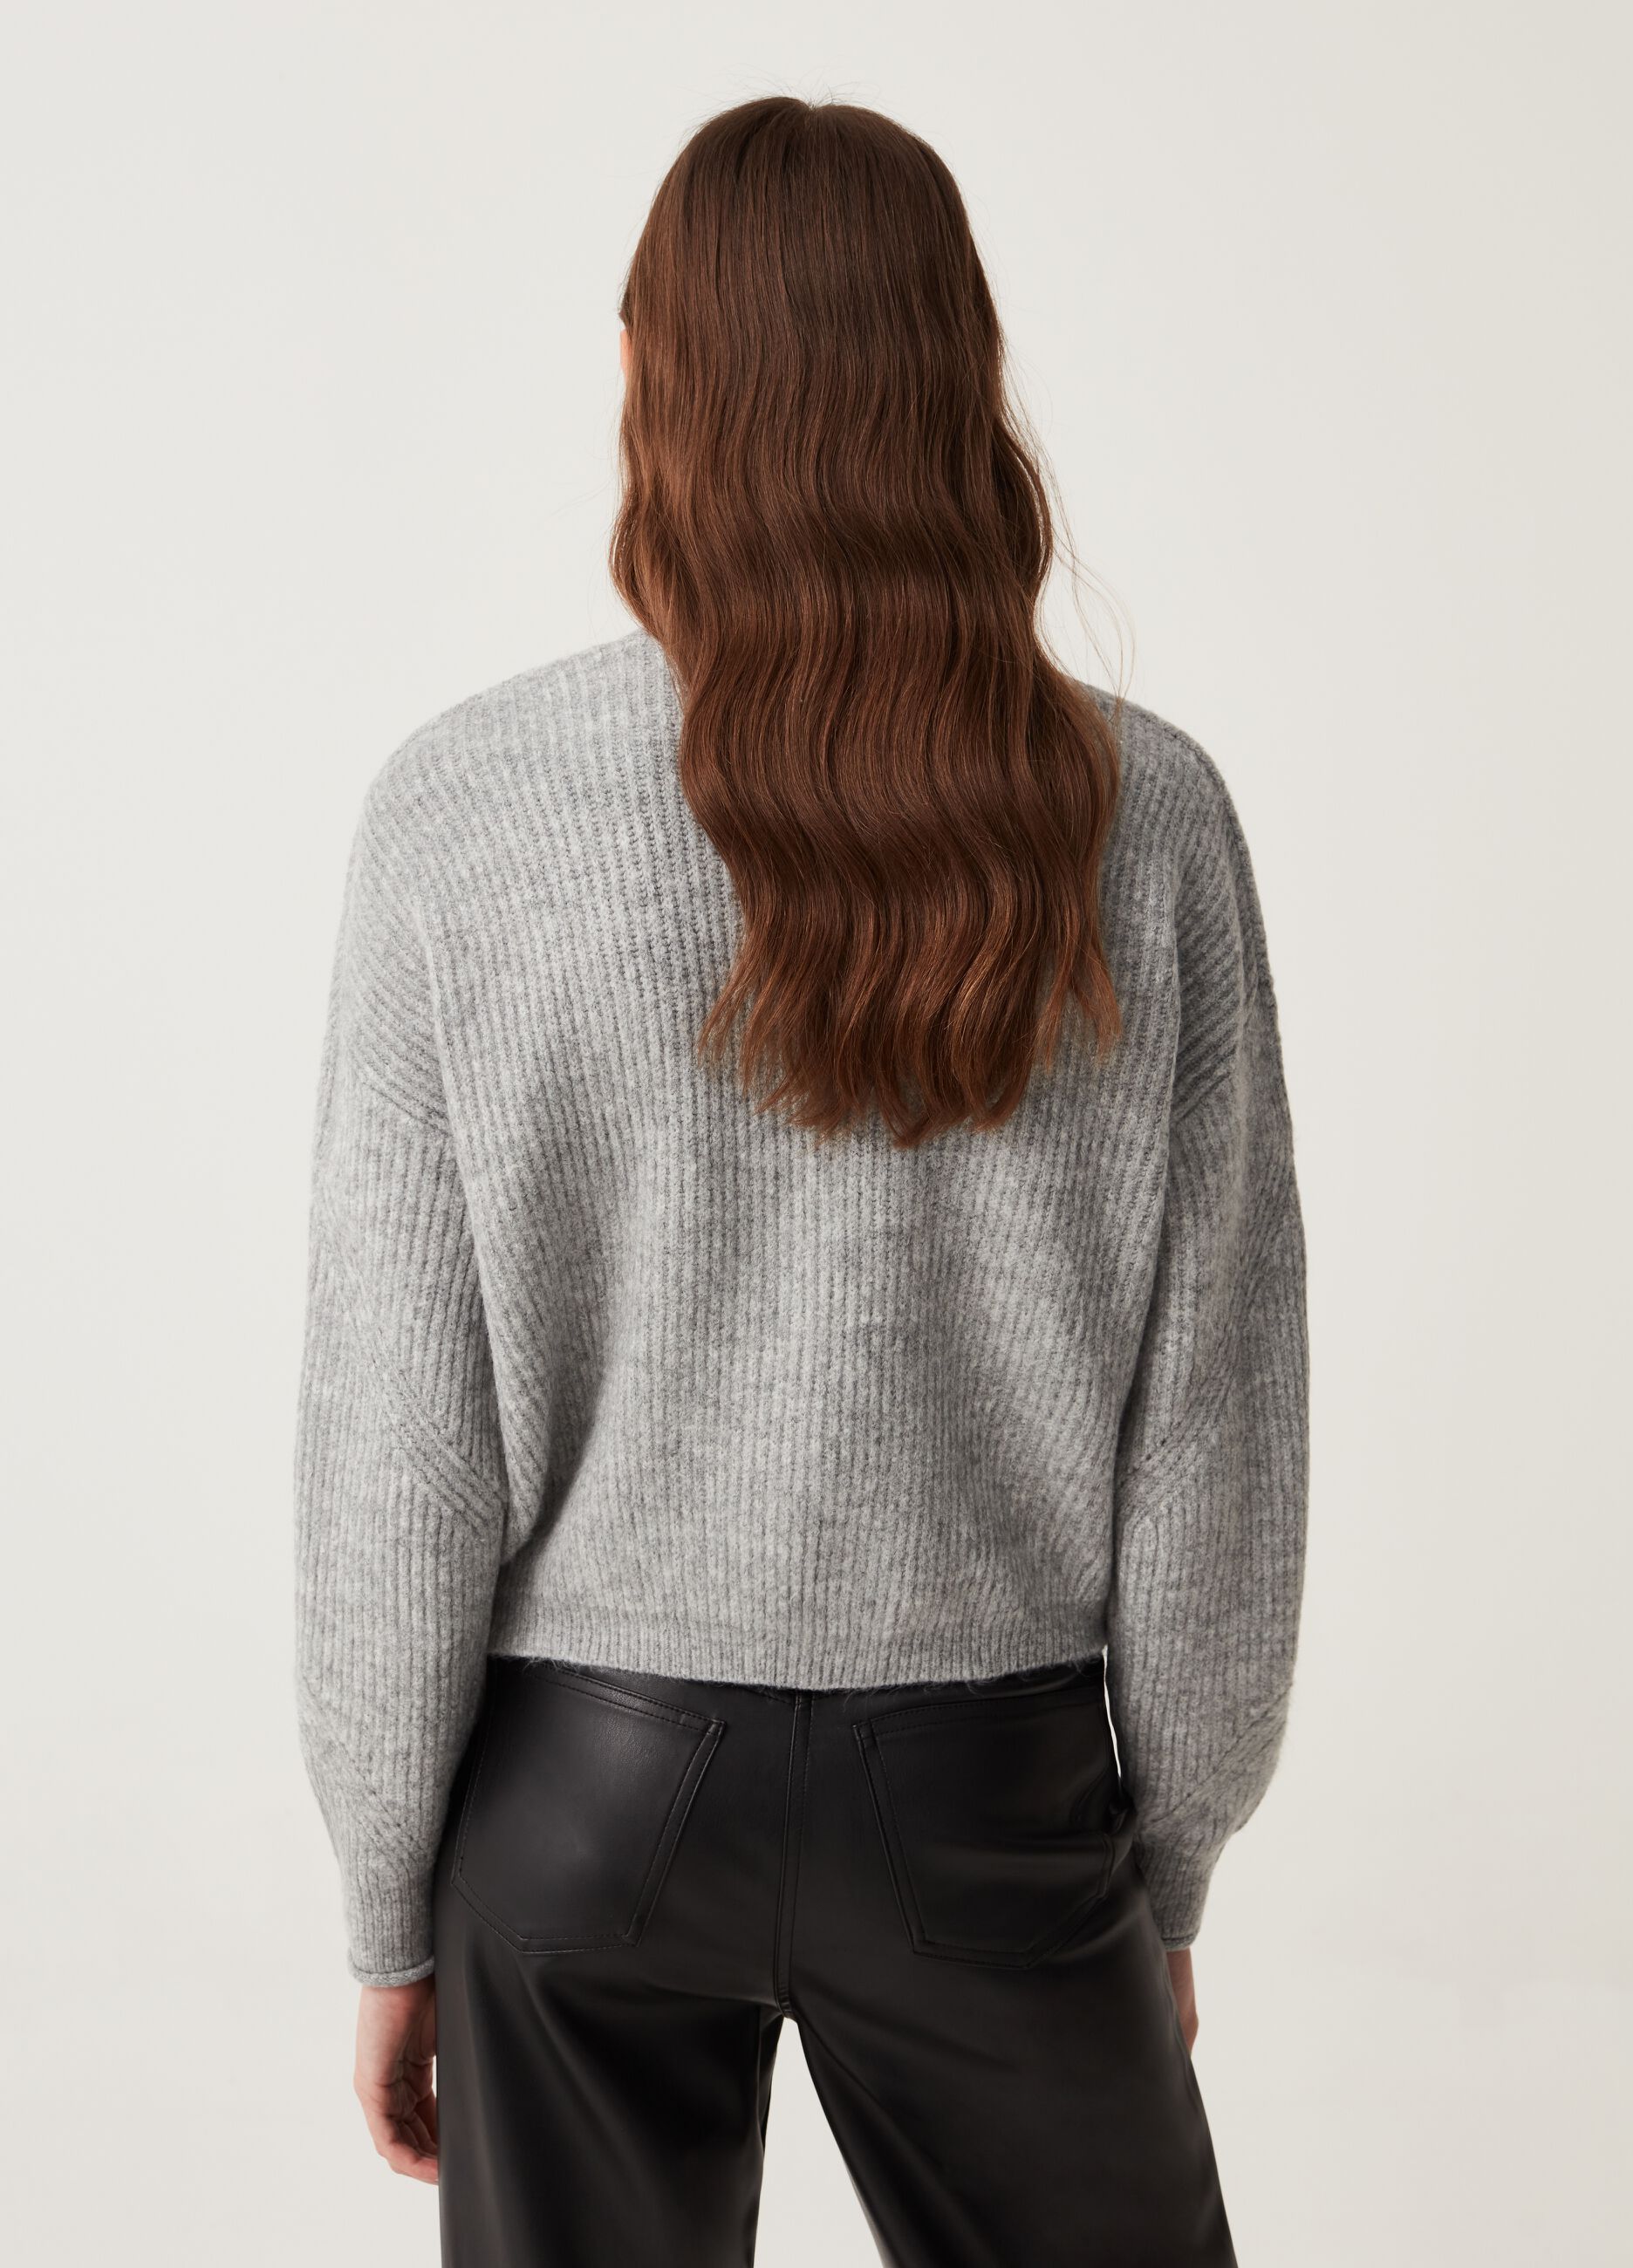 Oversize pullover with round neck